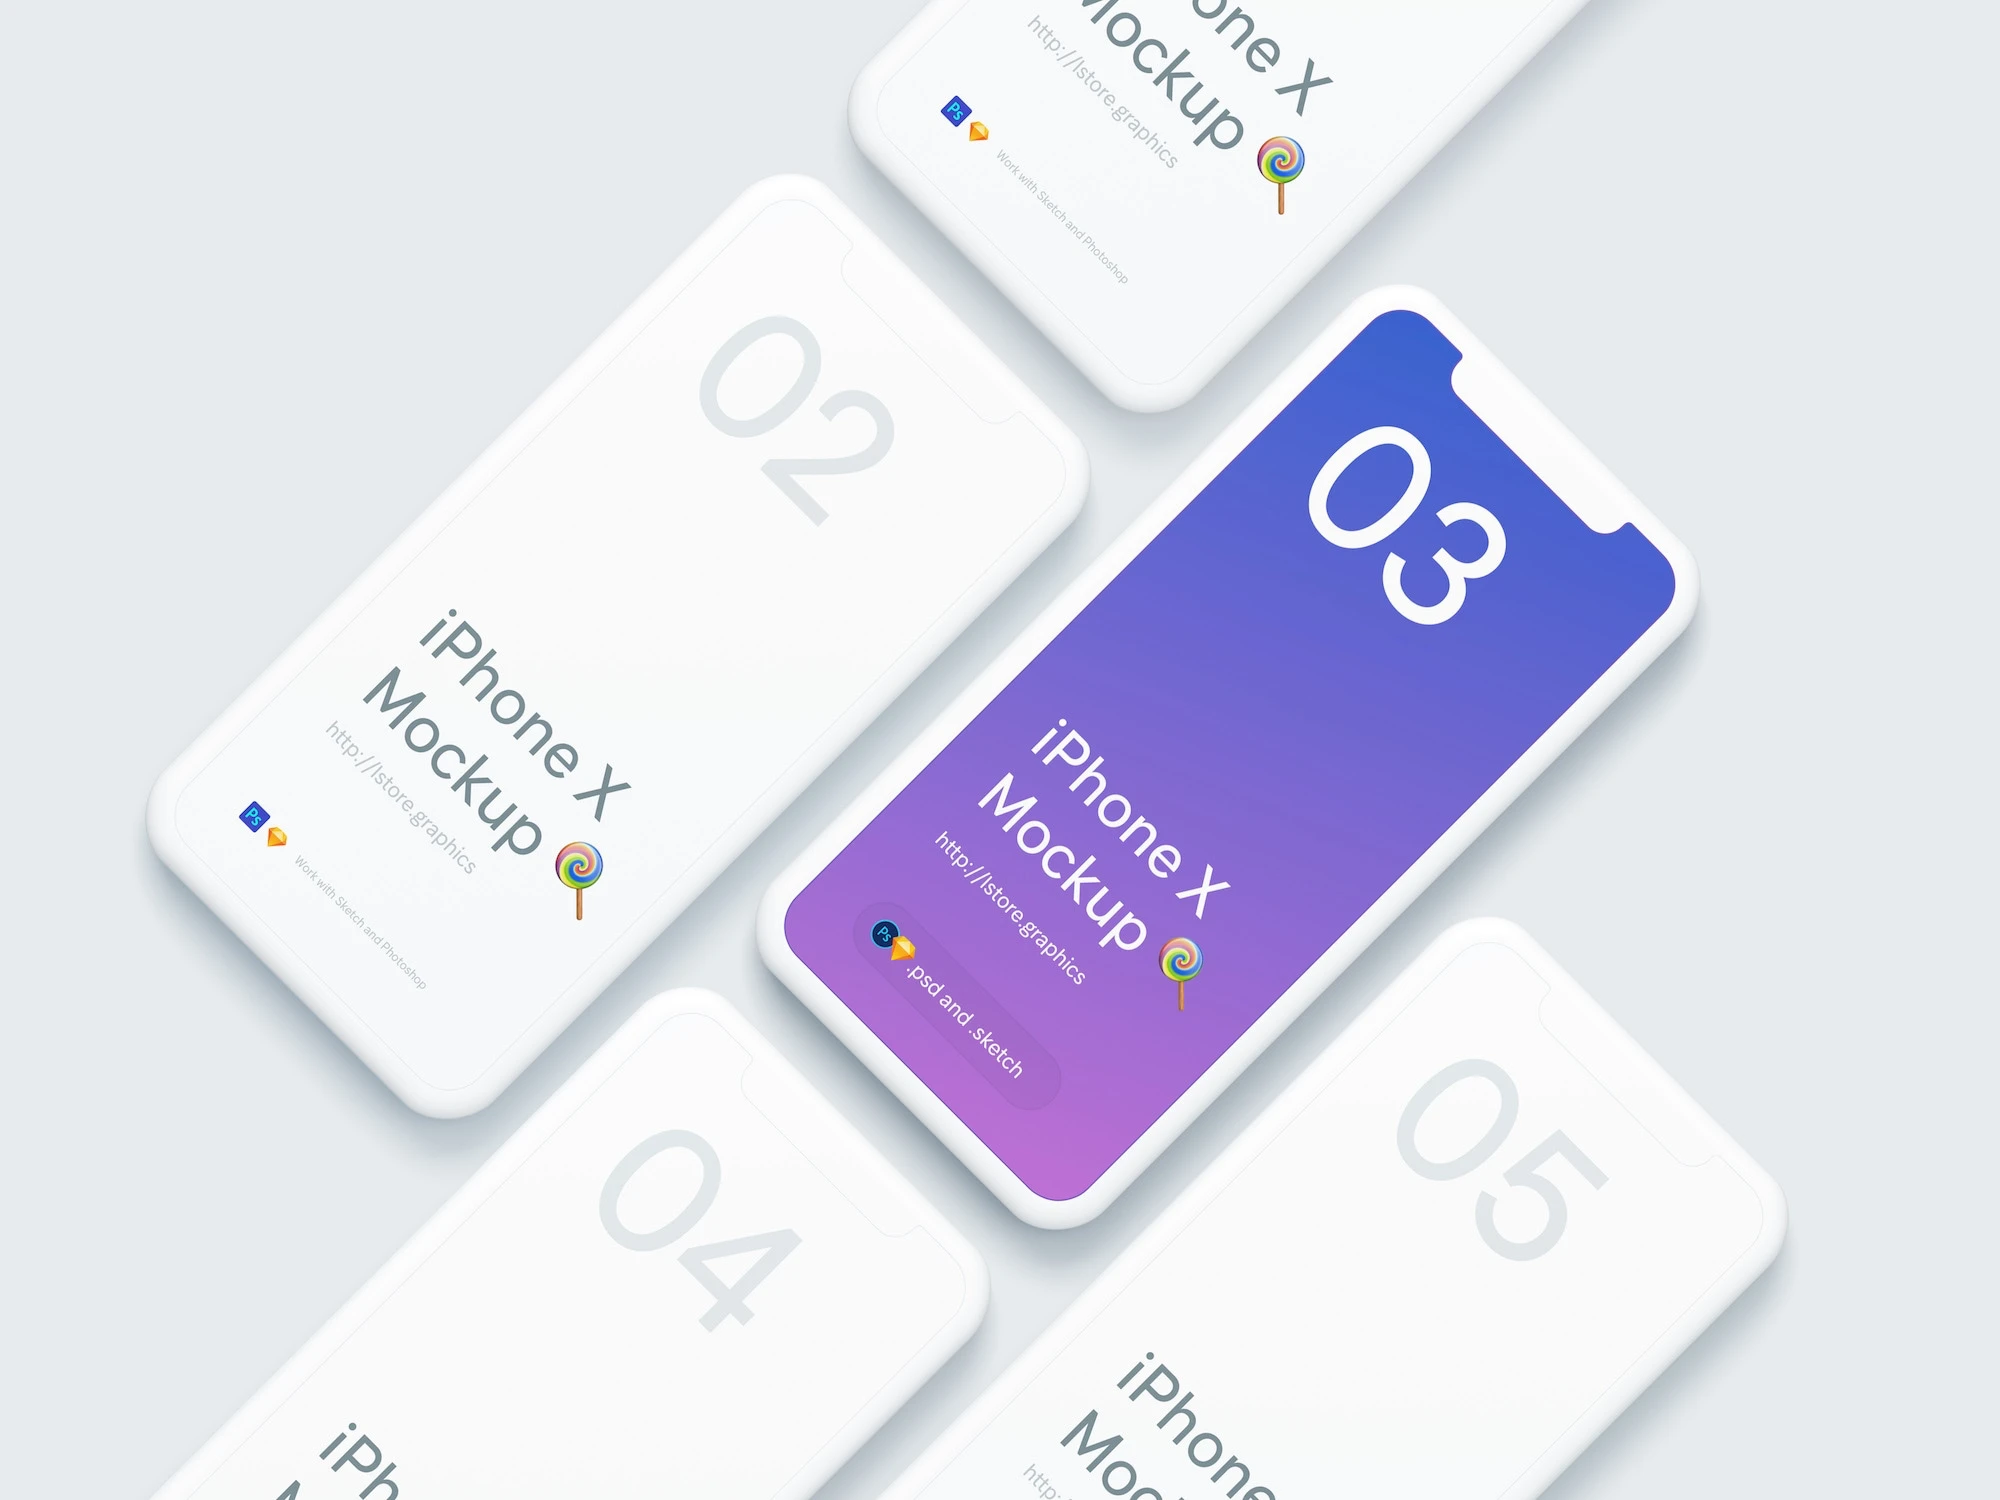 Simple iPhone X Mockups - Super clean, minimalistic free iPhone X mockups with awesome customization features and huge resolution.